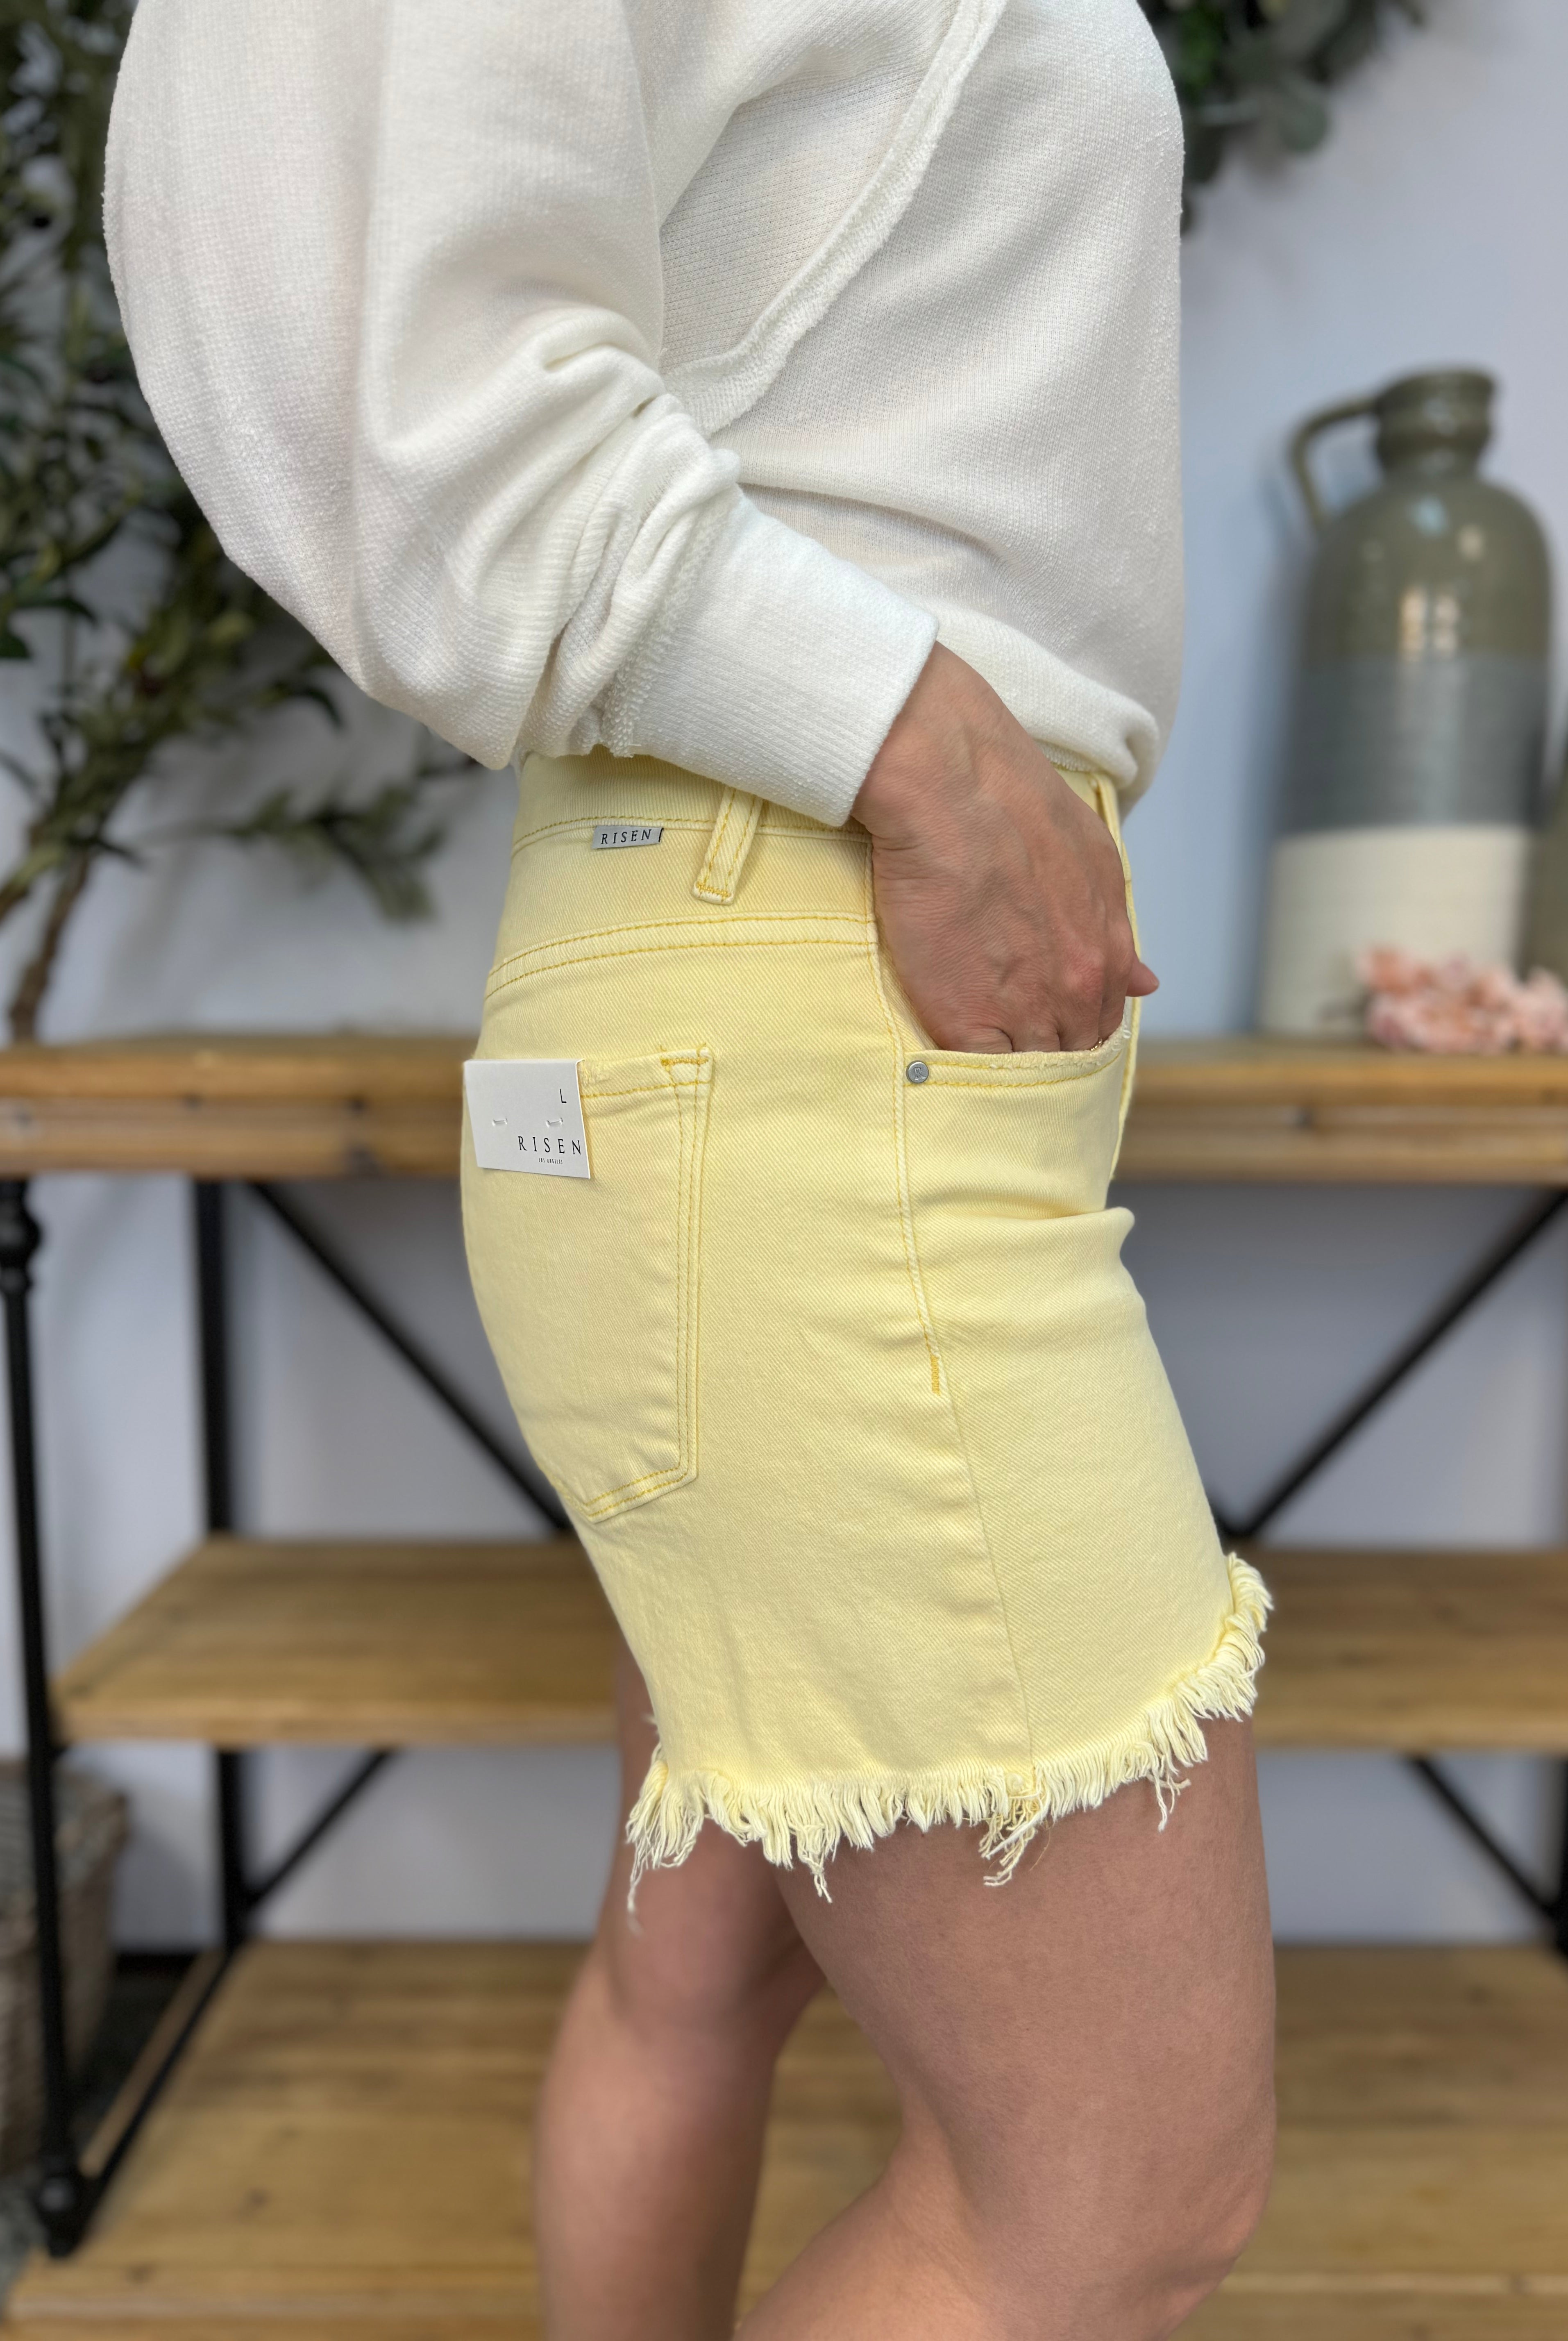 Let the Sunshine Risen Shorts-230 Skirts/Shorts-Risen-The Lovely Closet, Women's Fashion Boutique in Alexandria, KY